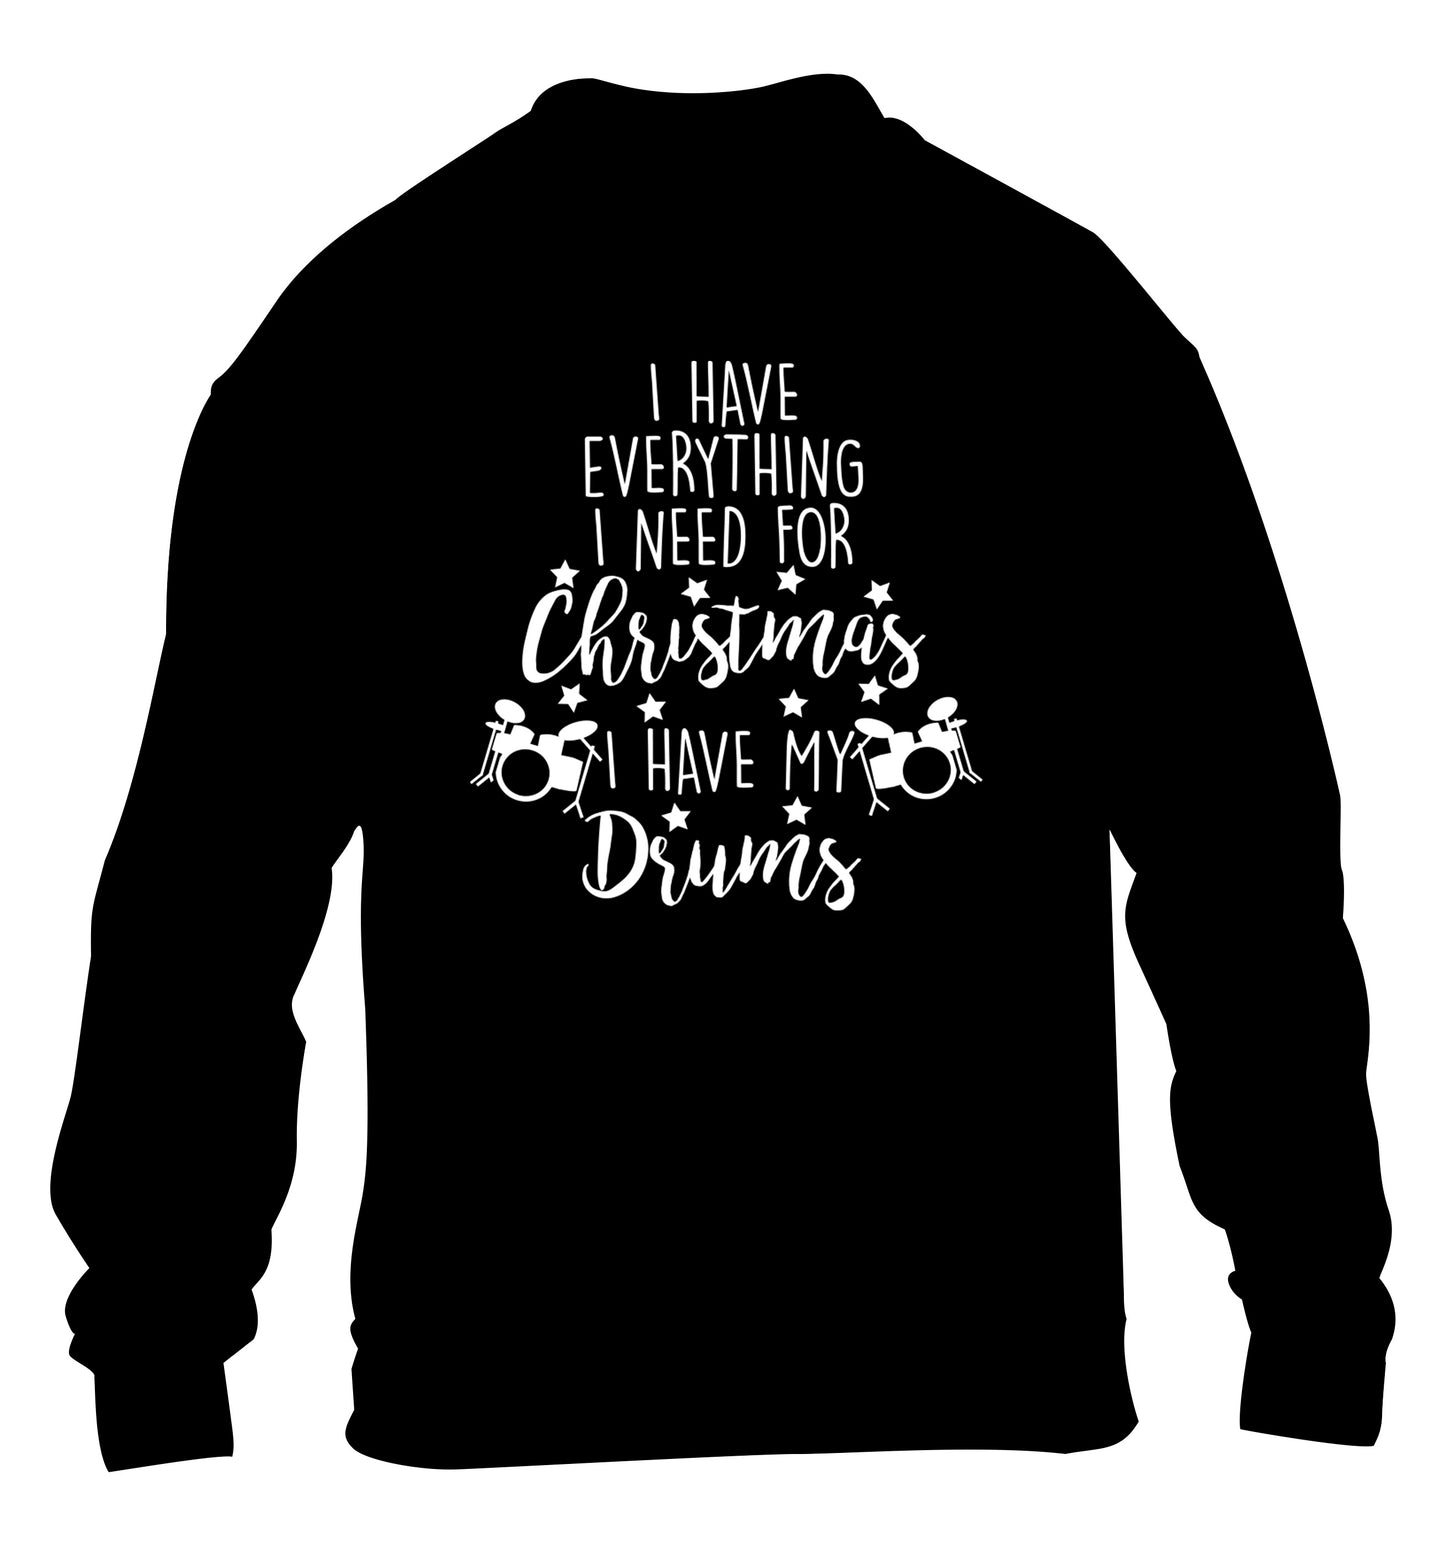 I have everything I need for Christmas I have my drums! children's black sweater 12-14 Years